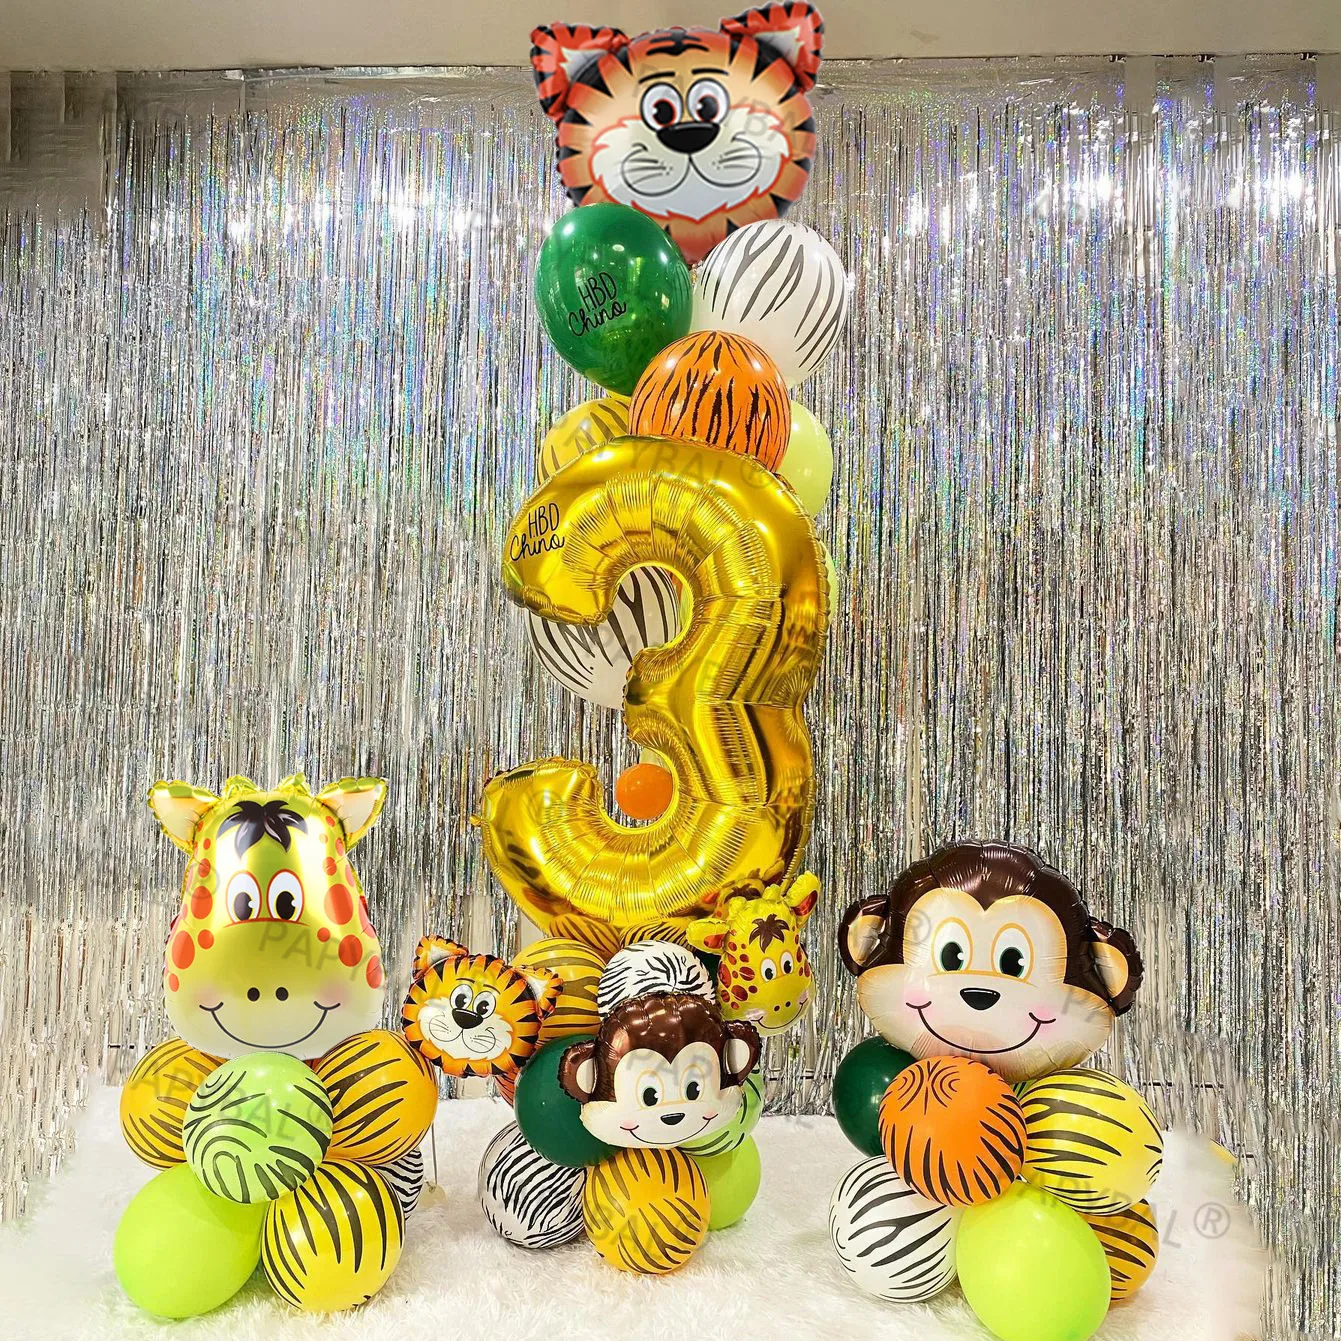 

39pcs Balloons Garland Arch Kit Jungle Forest Animal Theme Number 32" Foil Balloons For Kids Birthday Gifts Party Decors Globos